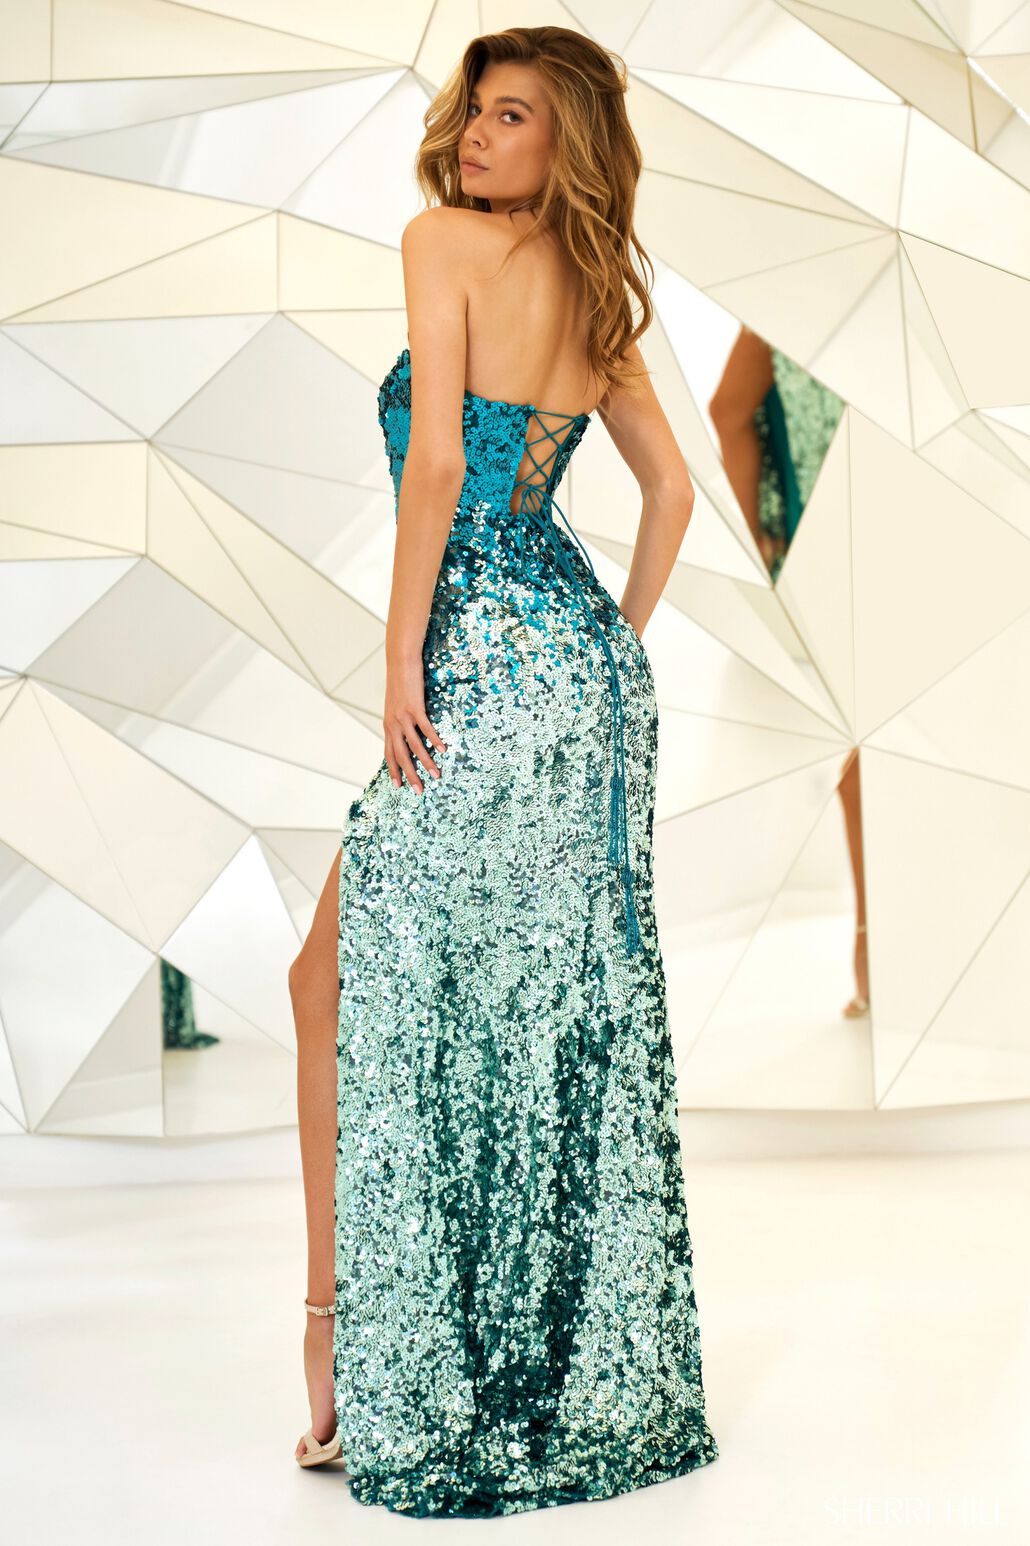 Striking Jade Ombre sequin gown by Sherri Hill, available at Madeline's in Toronto and Boca Raton. Elevate your style with this mesmerizing dress for unforgettable moments.